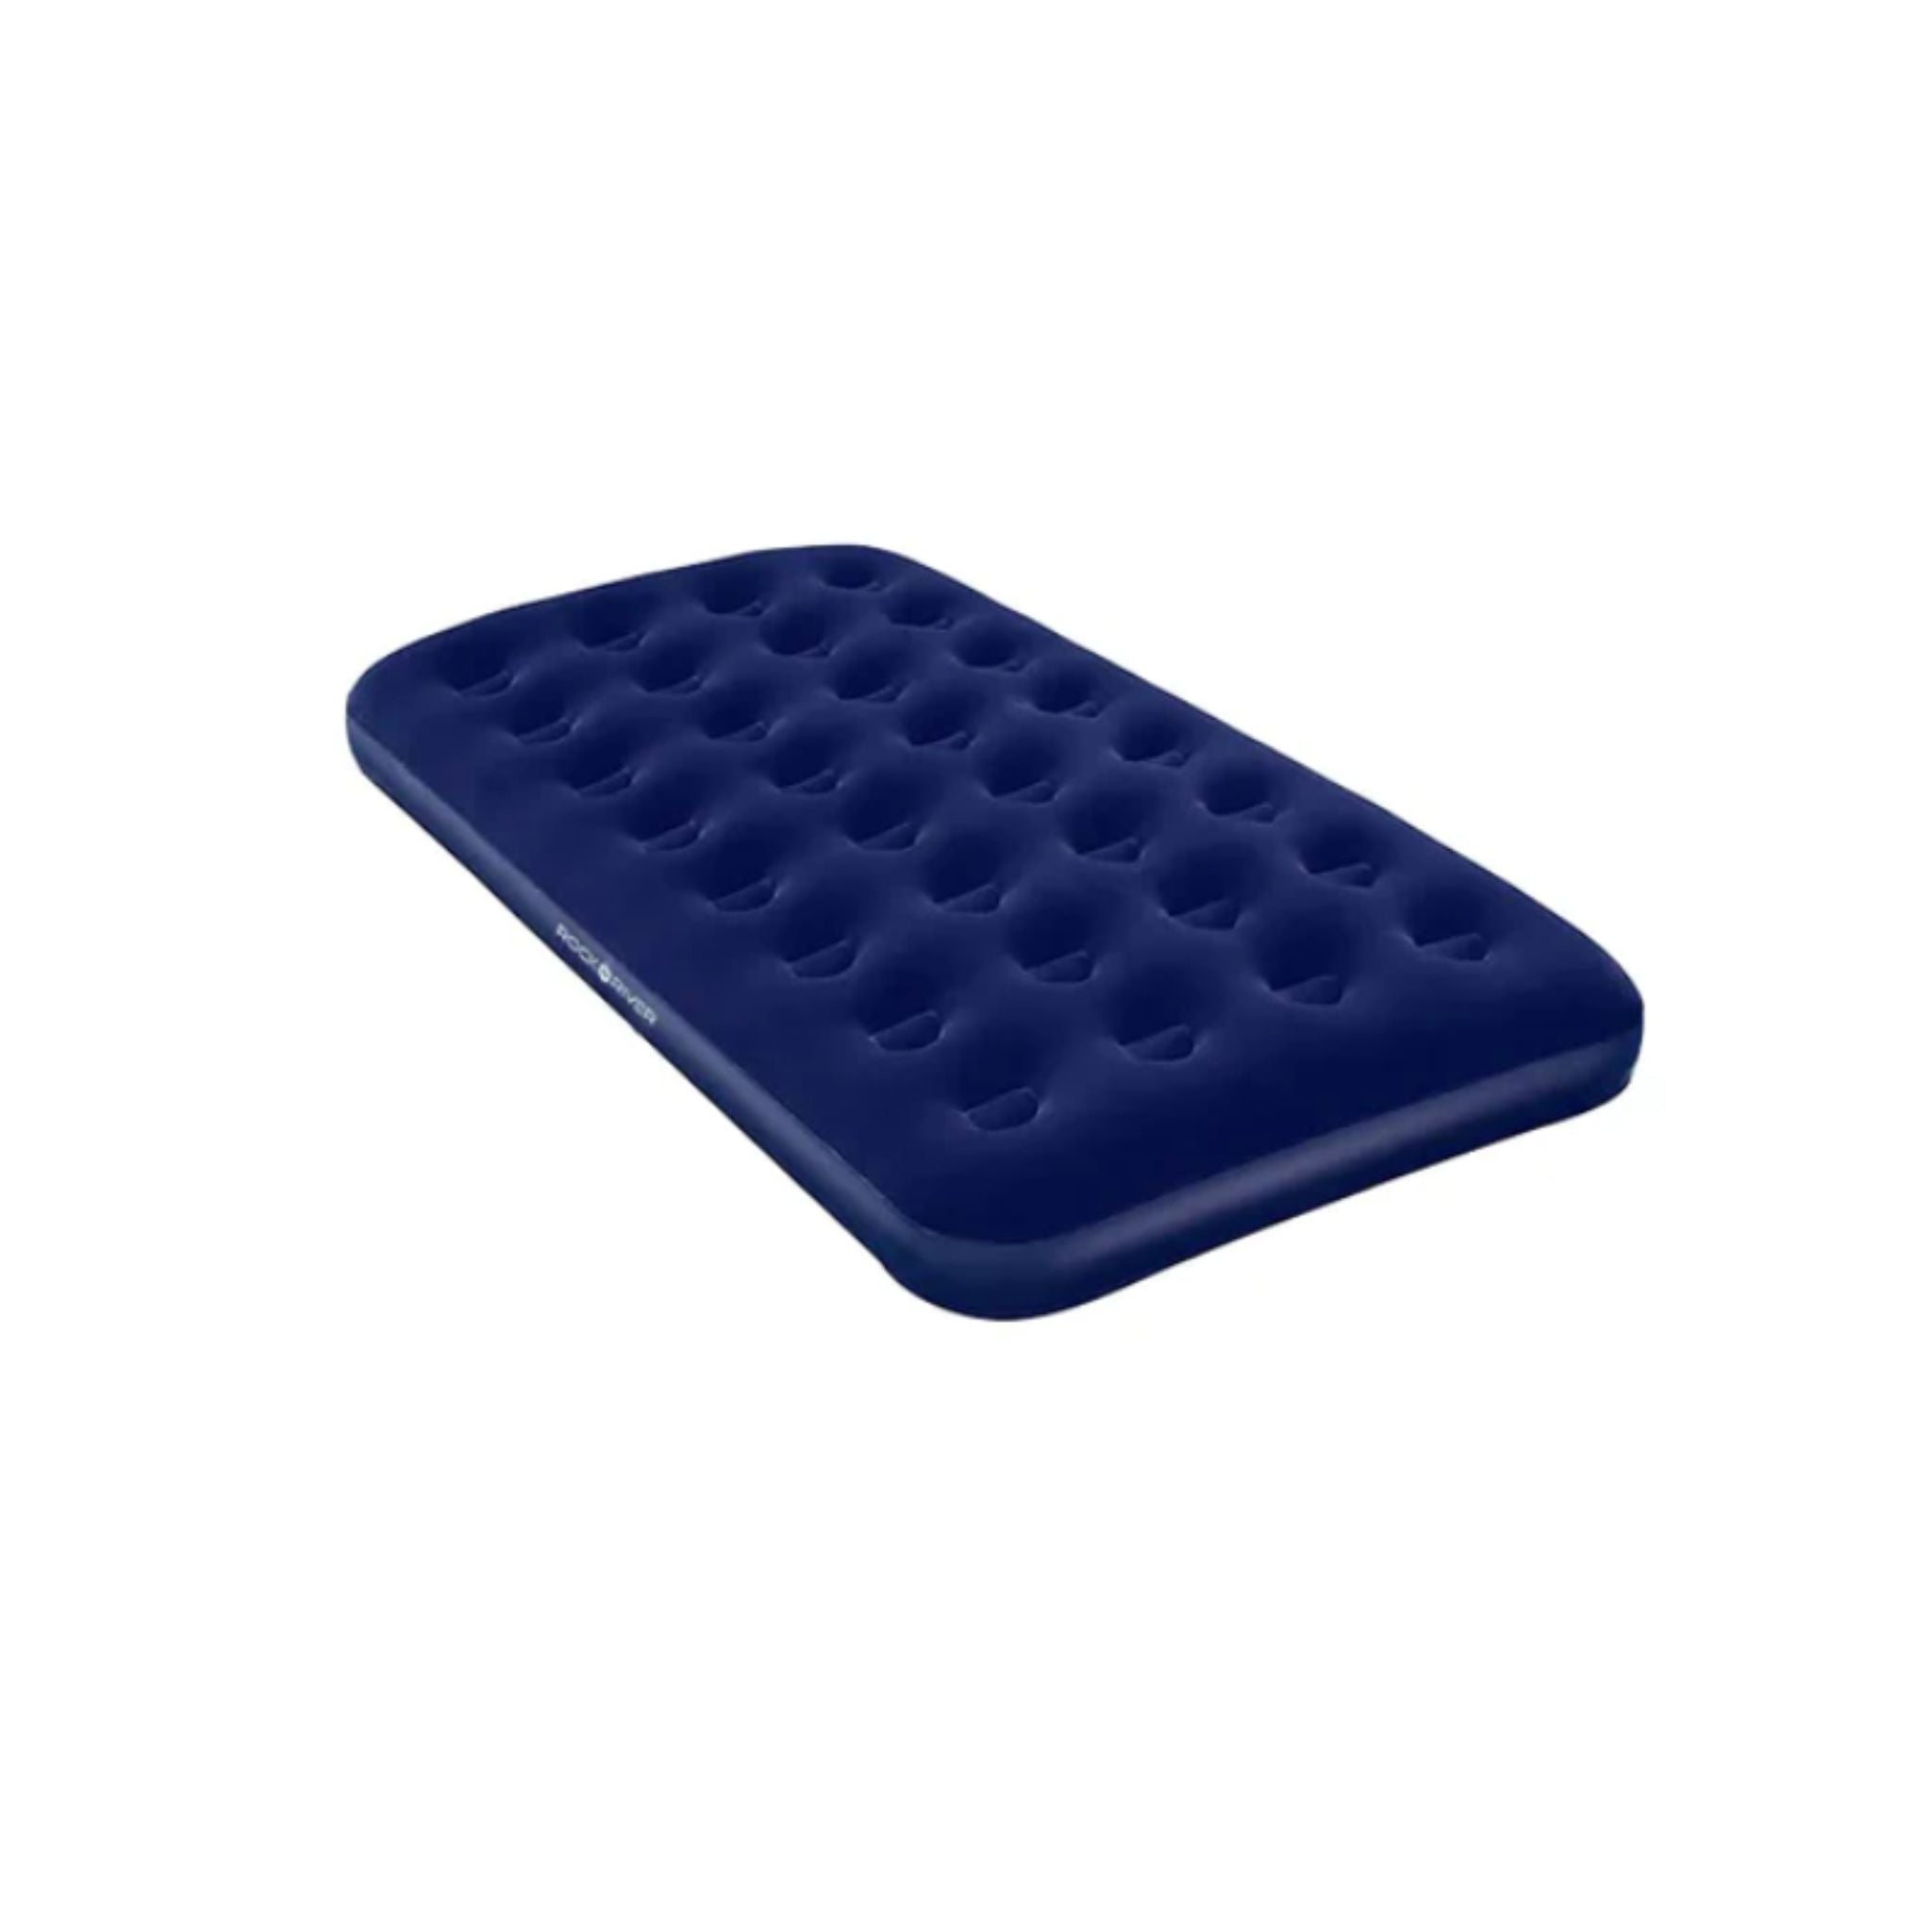 Rock n River Double Flock Airbed | Rock N River | Portwest - The Outdoor Shop